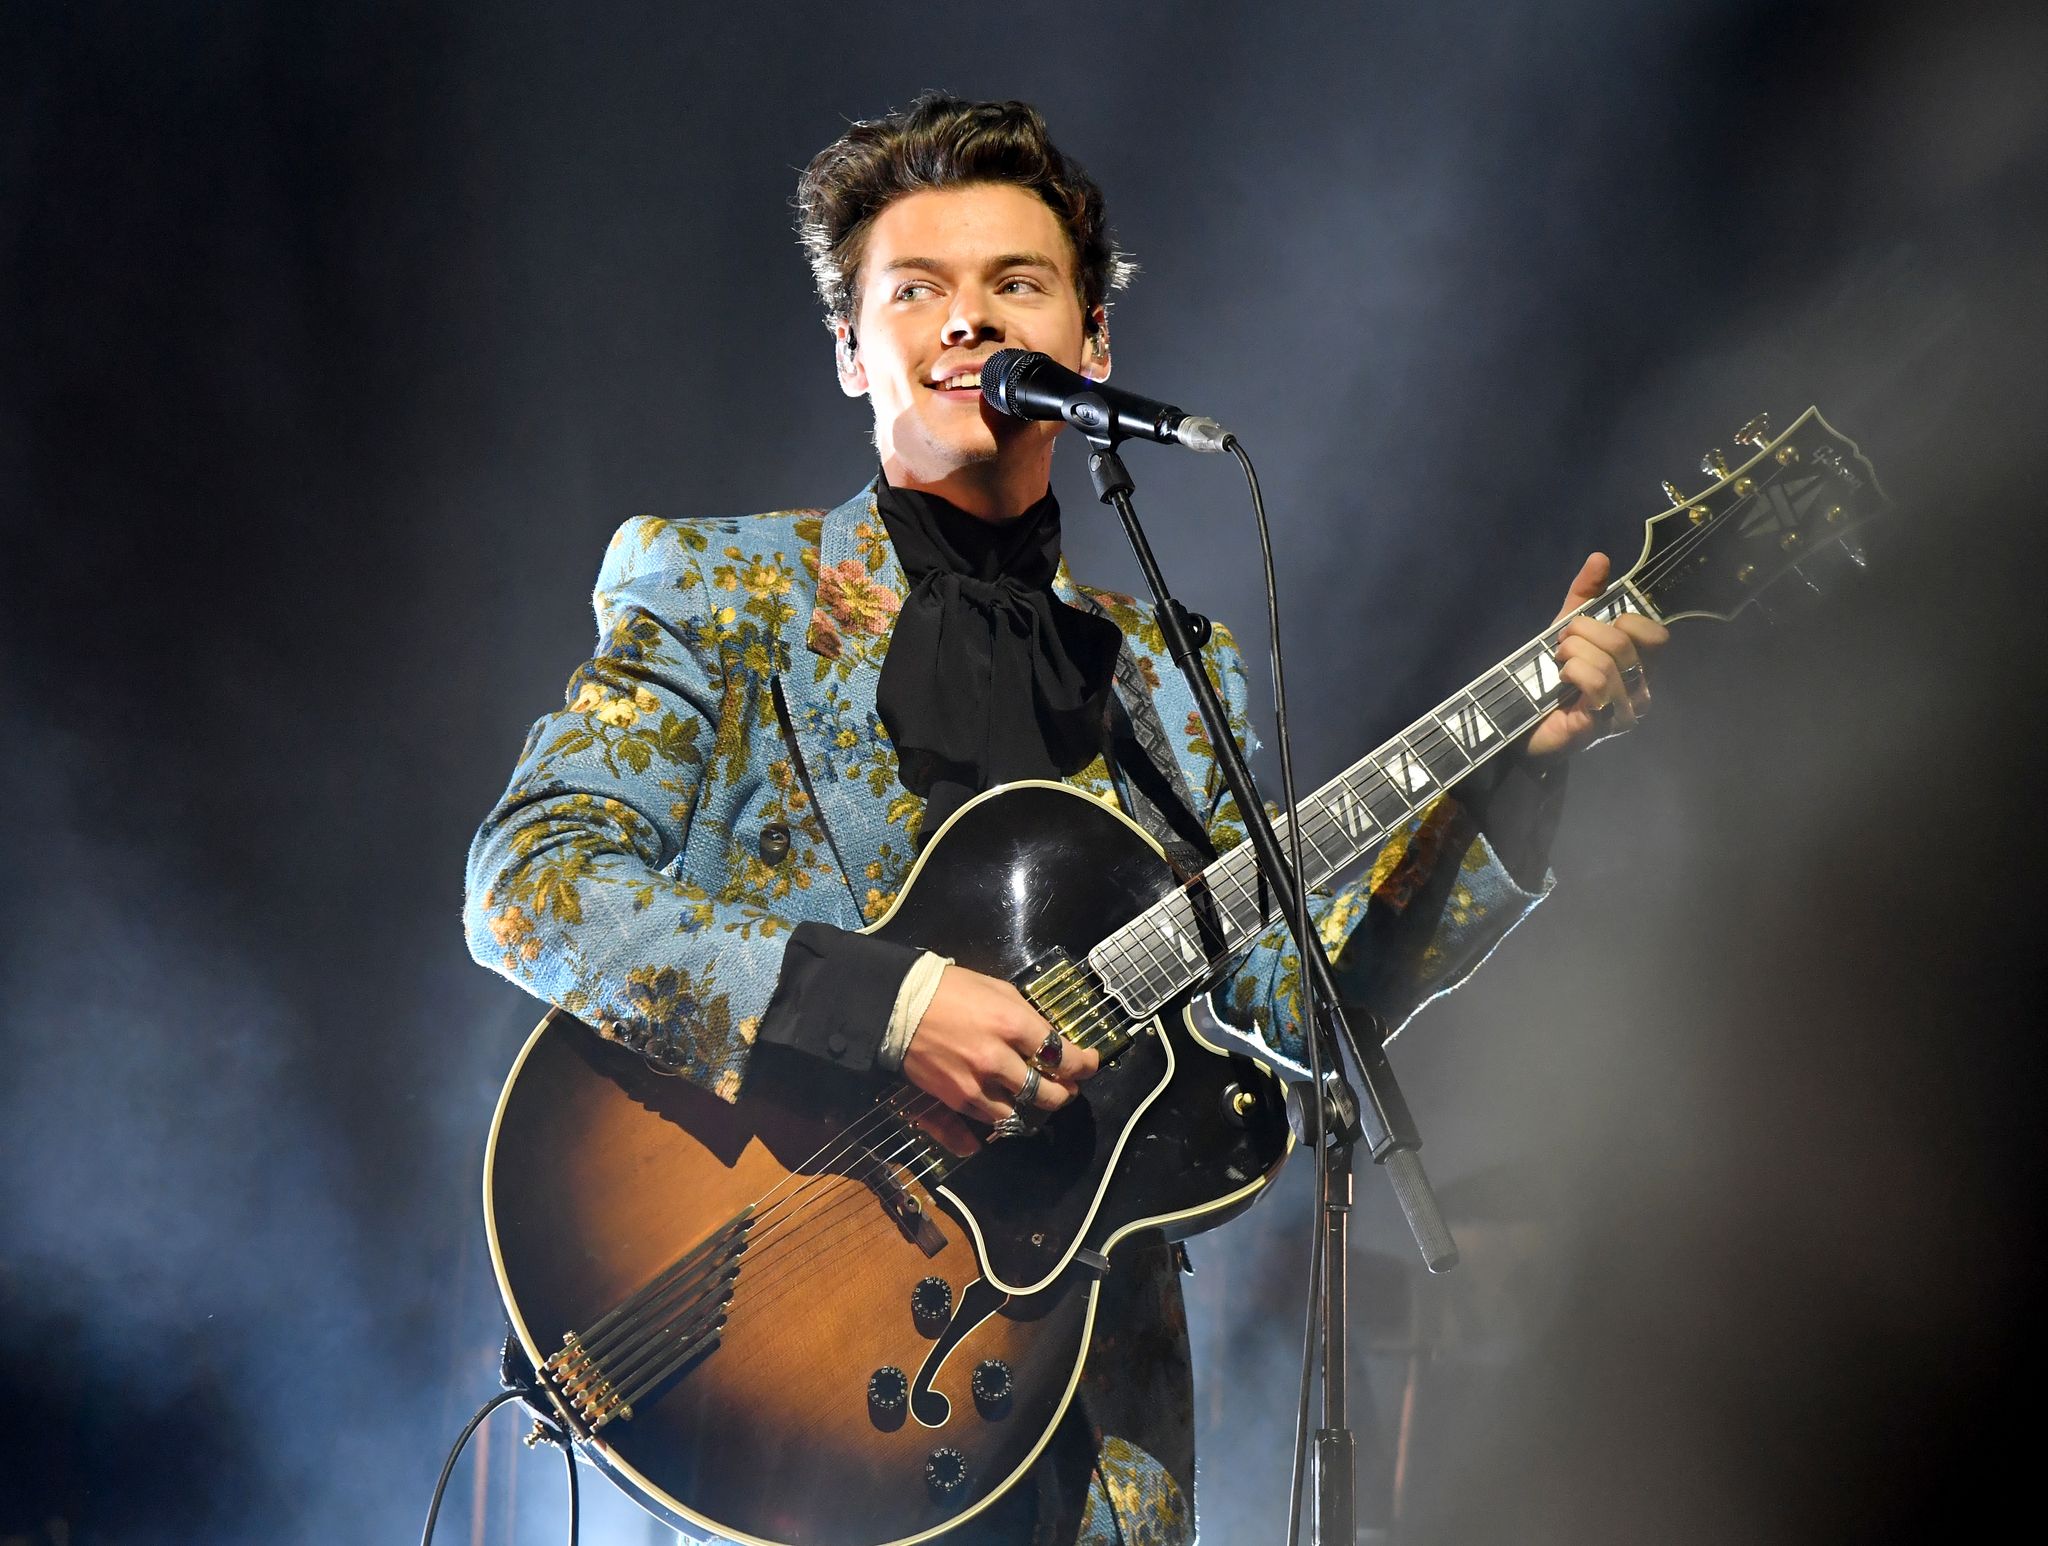 Harry Styles to perform at Victoria's Secret Fashion Show